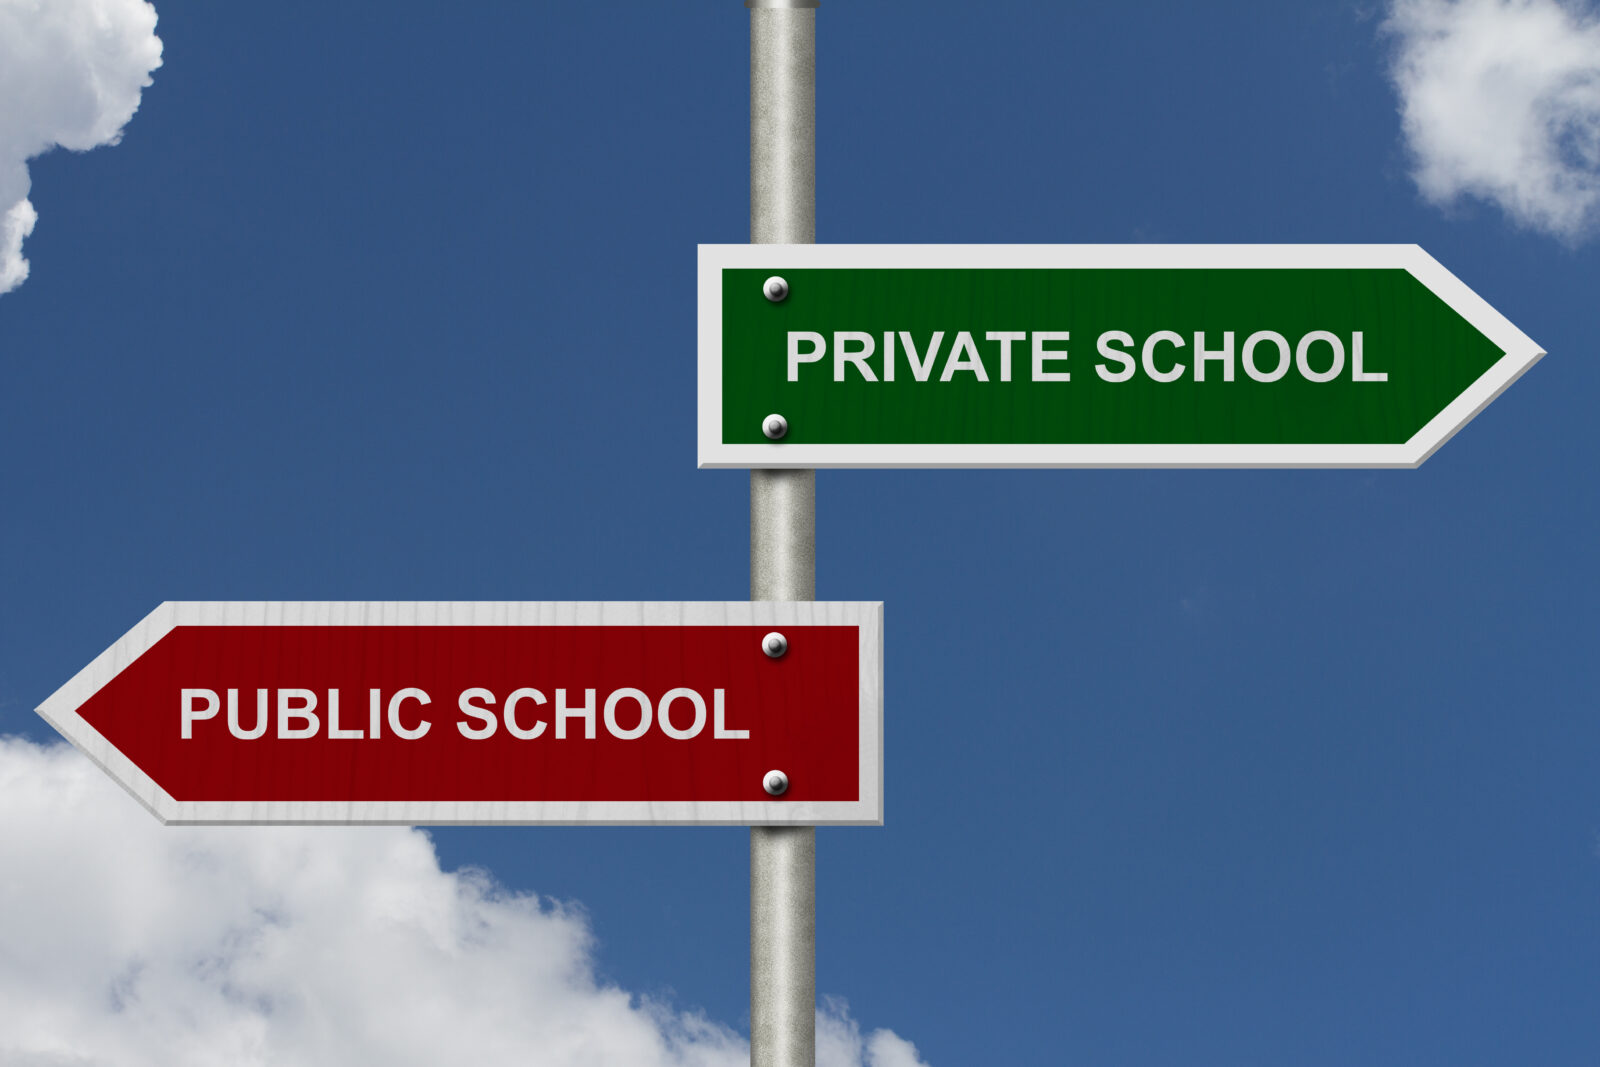 Sign with Public school pointing left, and Private school pointing right.